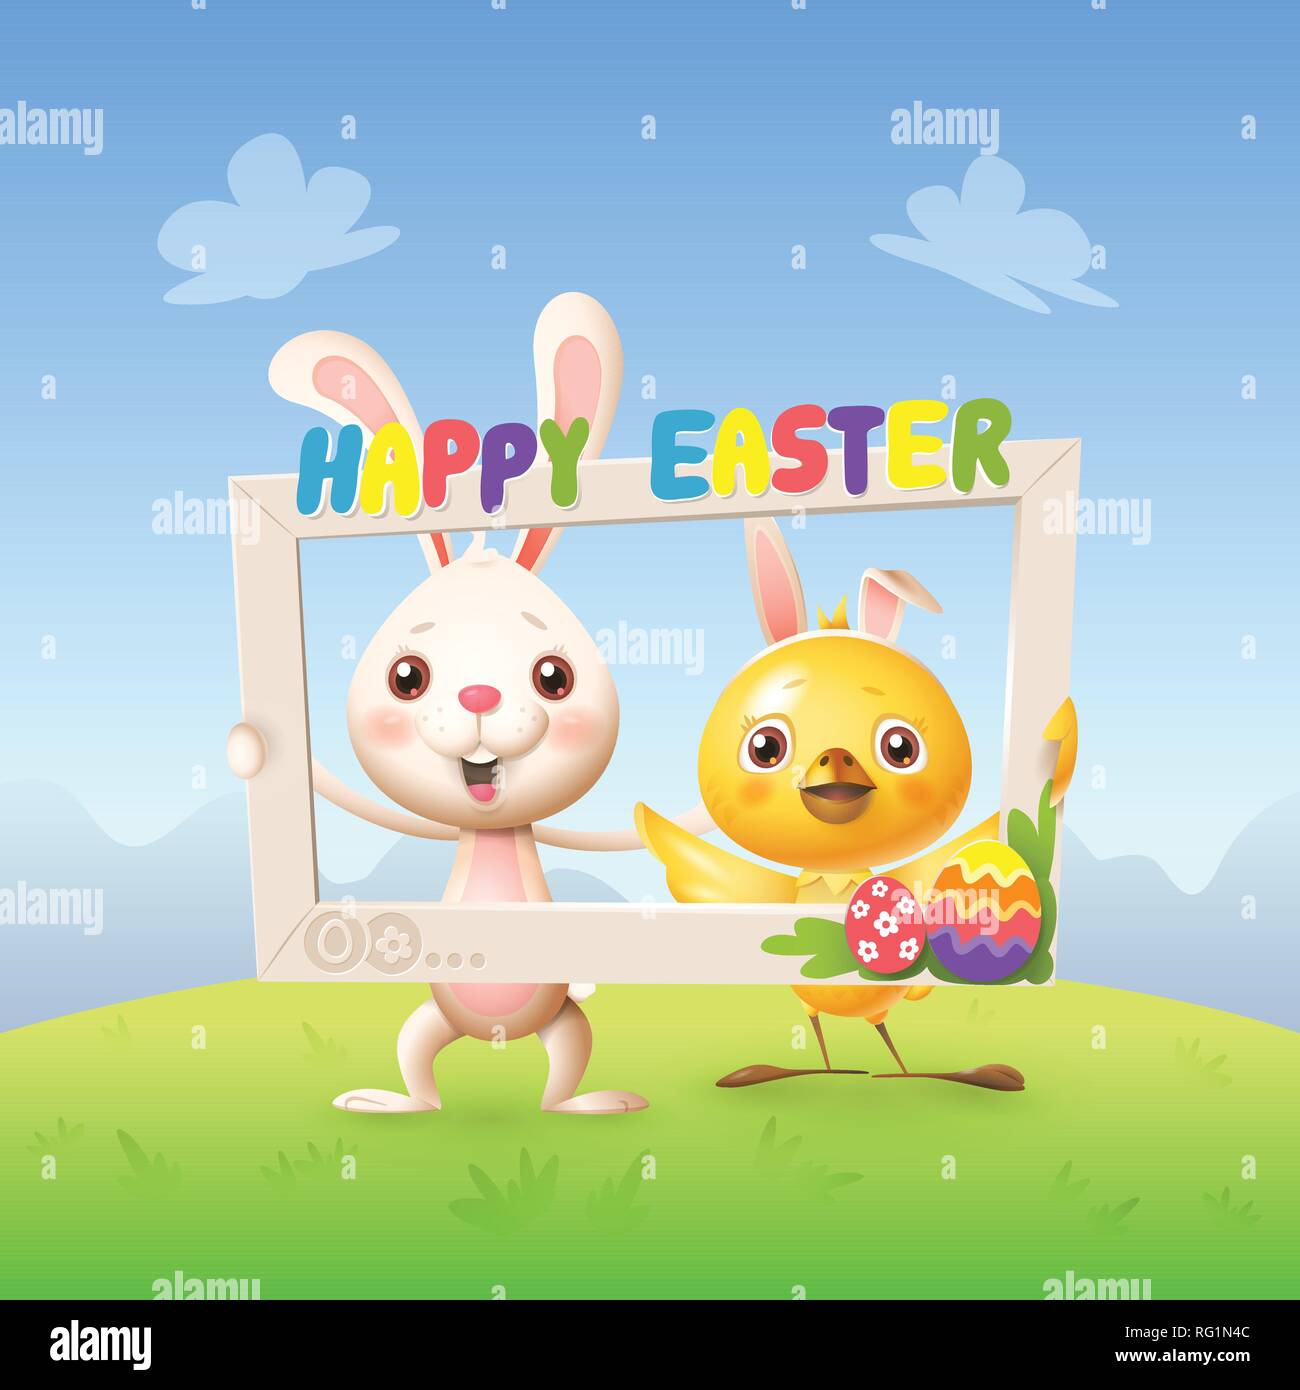 https://c8.alamy.com/comp/RG1N4C/easter-animals-happy-cute-bunny-and-chicken-celebrate-easter-with-social-network-photo-frame-spring-landscape-background-RG1N4C.jpg